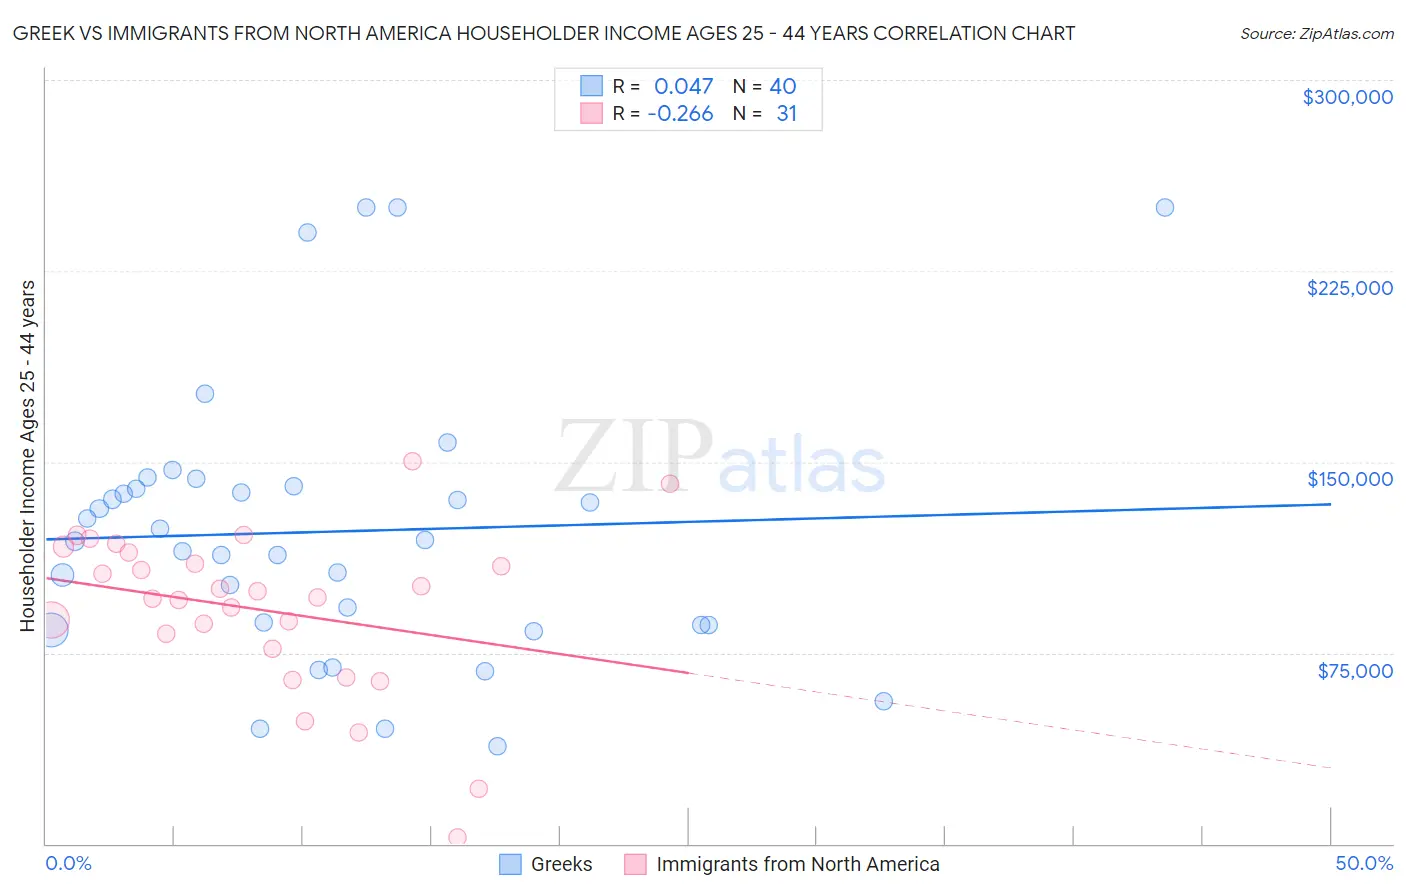 Greek vs Immigrants from North America Householder Income Ages 25 - 44 years